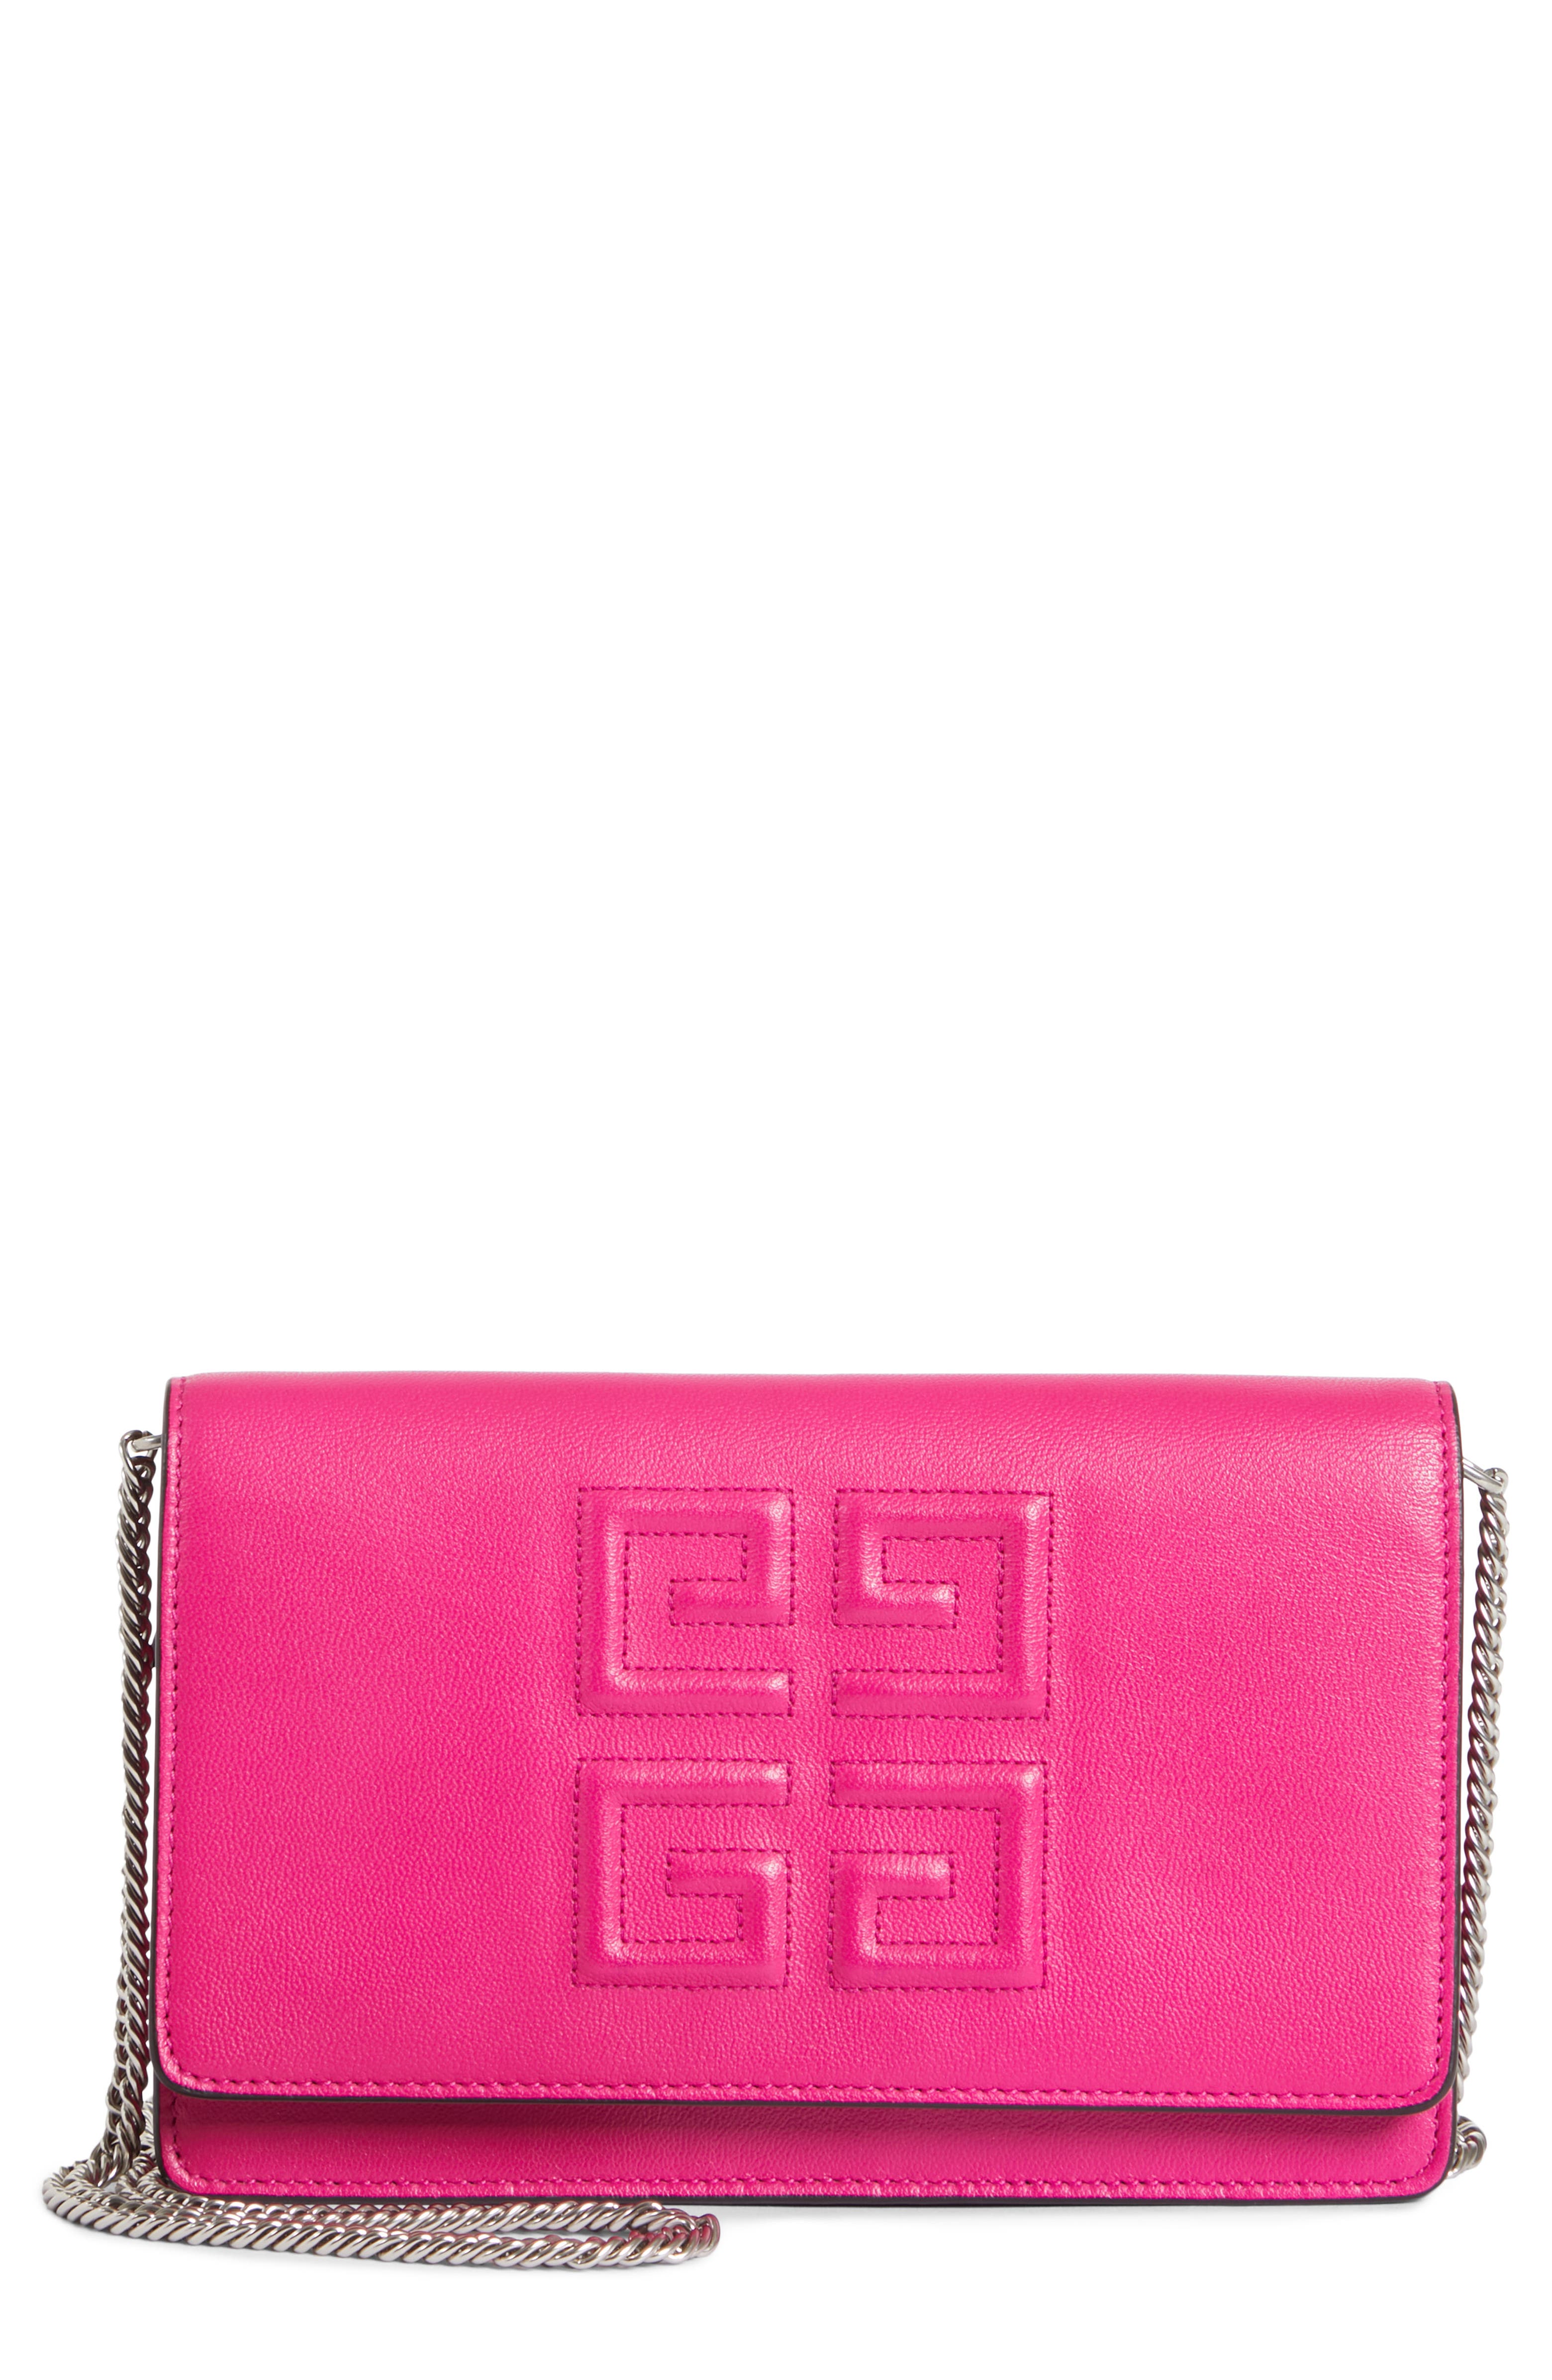 Givenchy Embossed Emblem Wallet on a Chain | Nordstrom